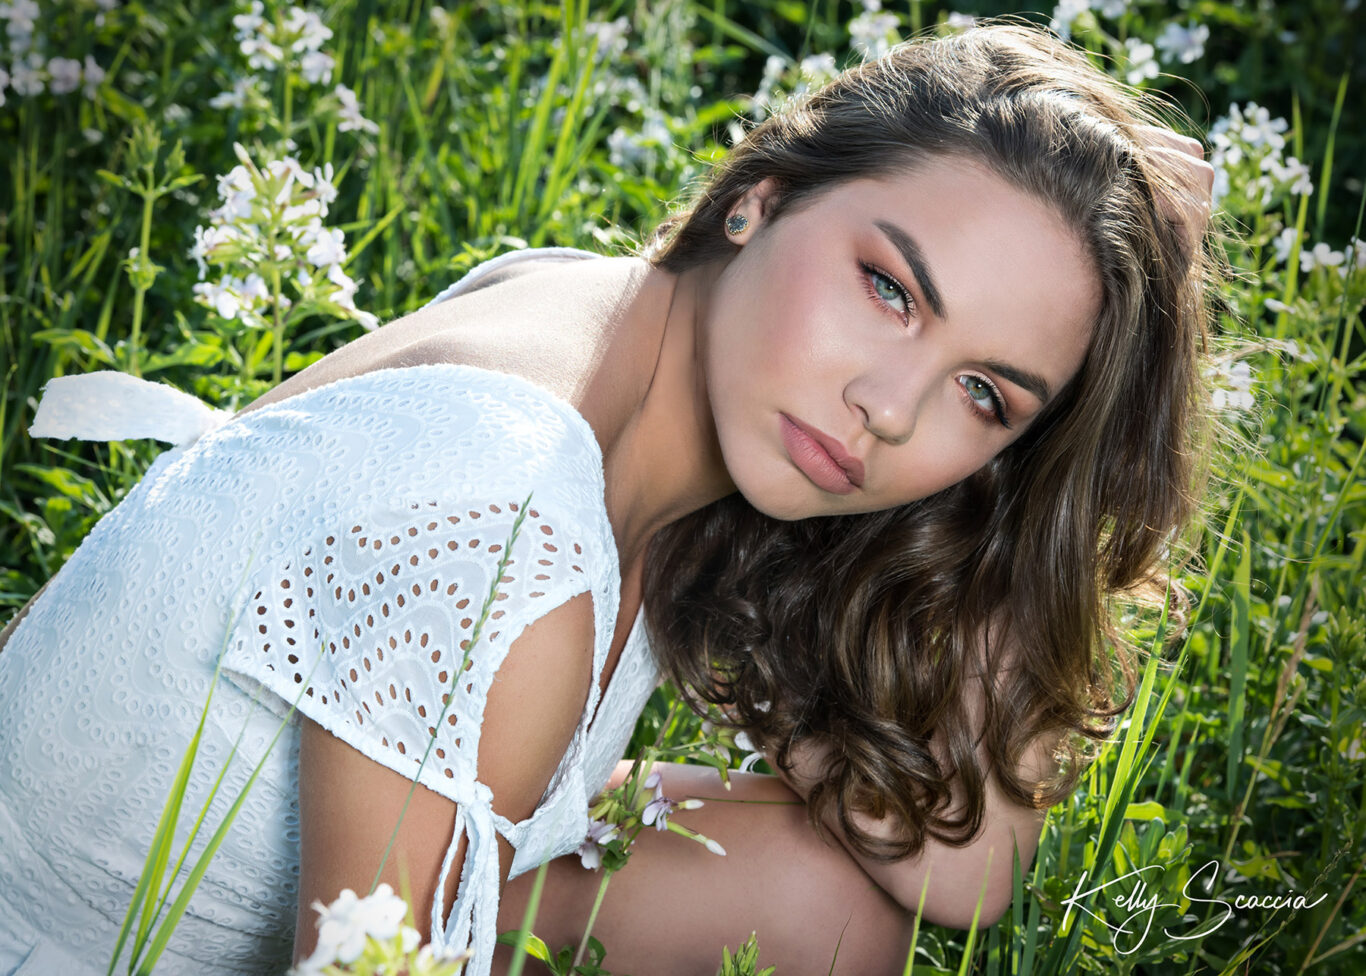 High School senior girl outdoor in a field wearing white up close headshot